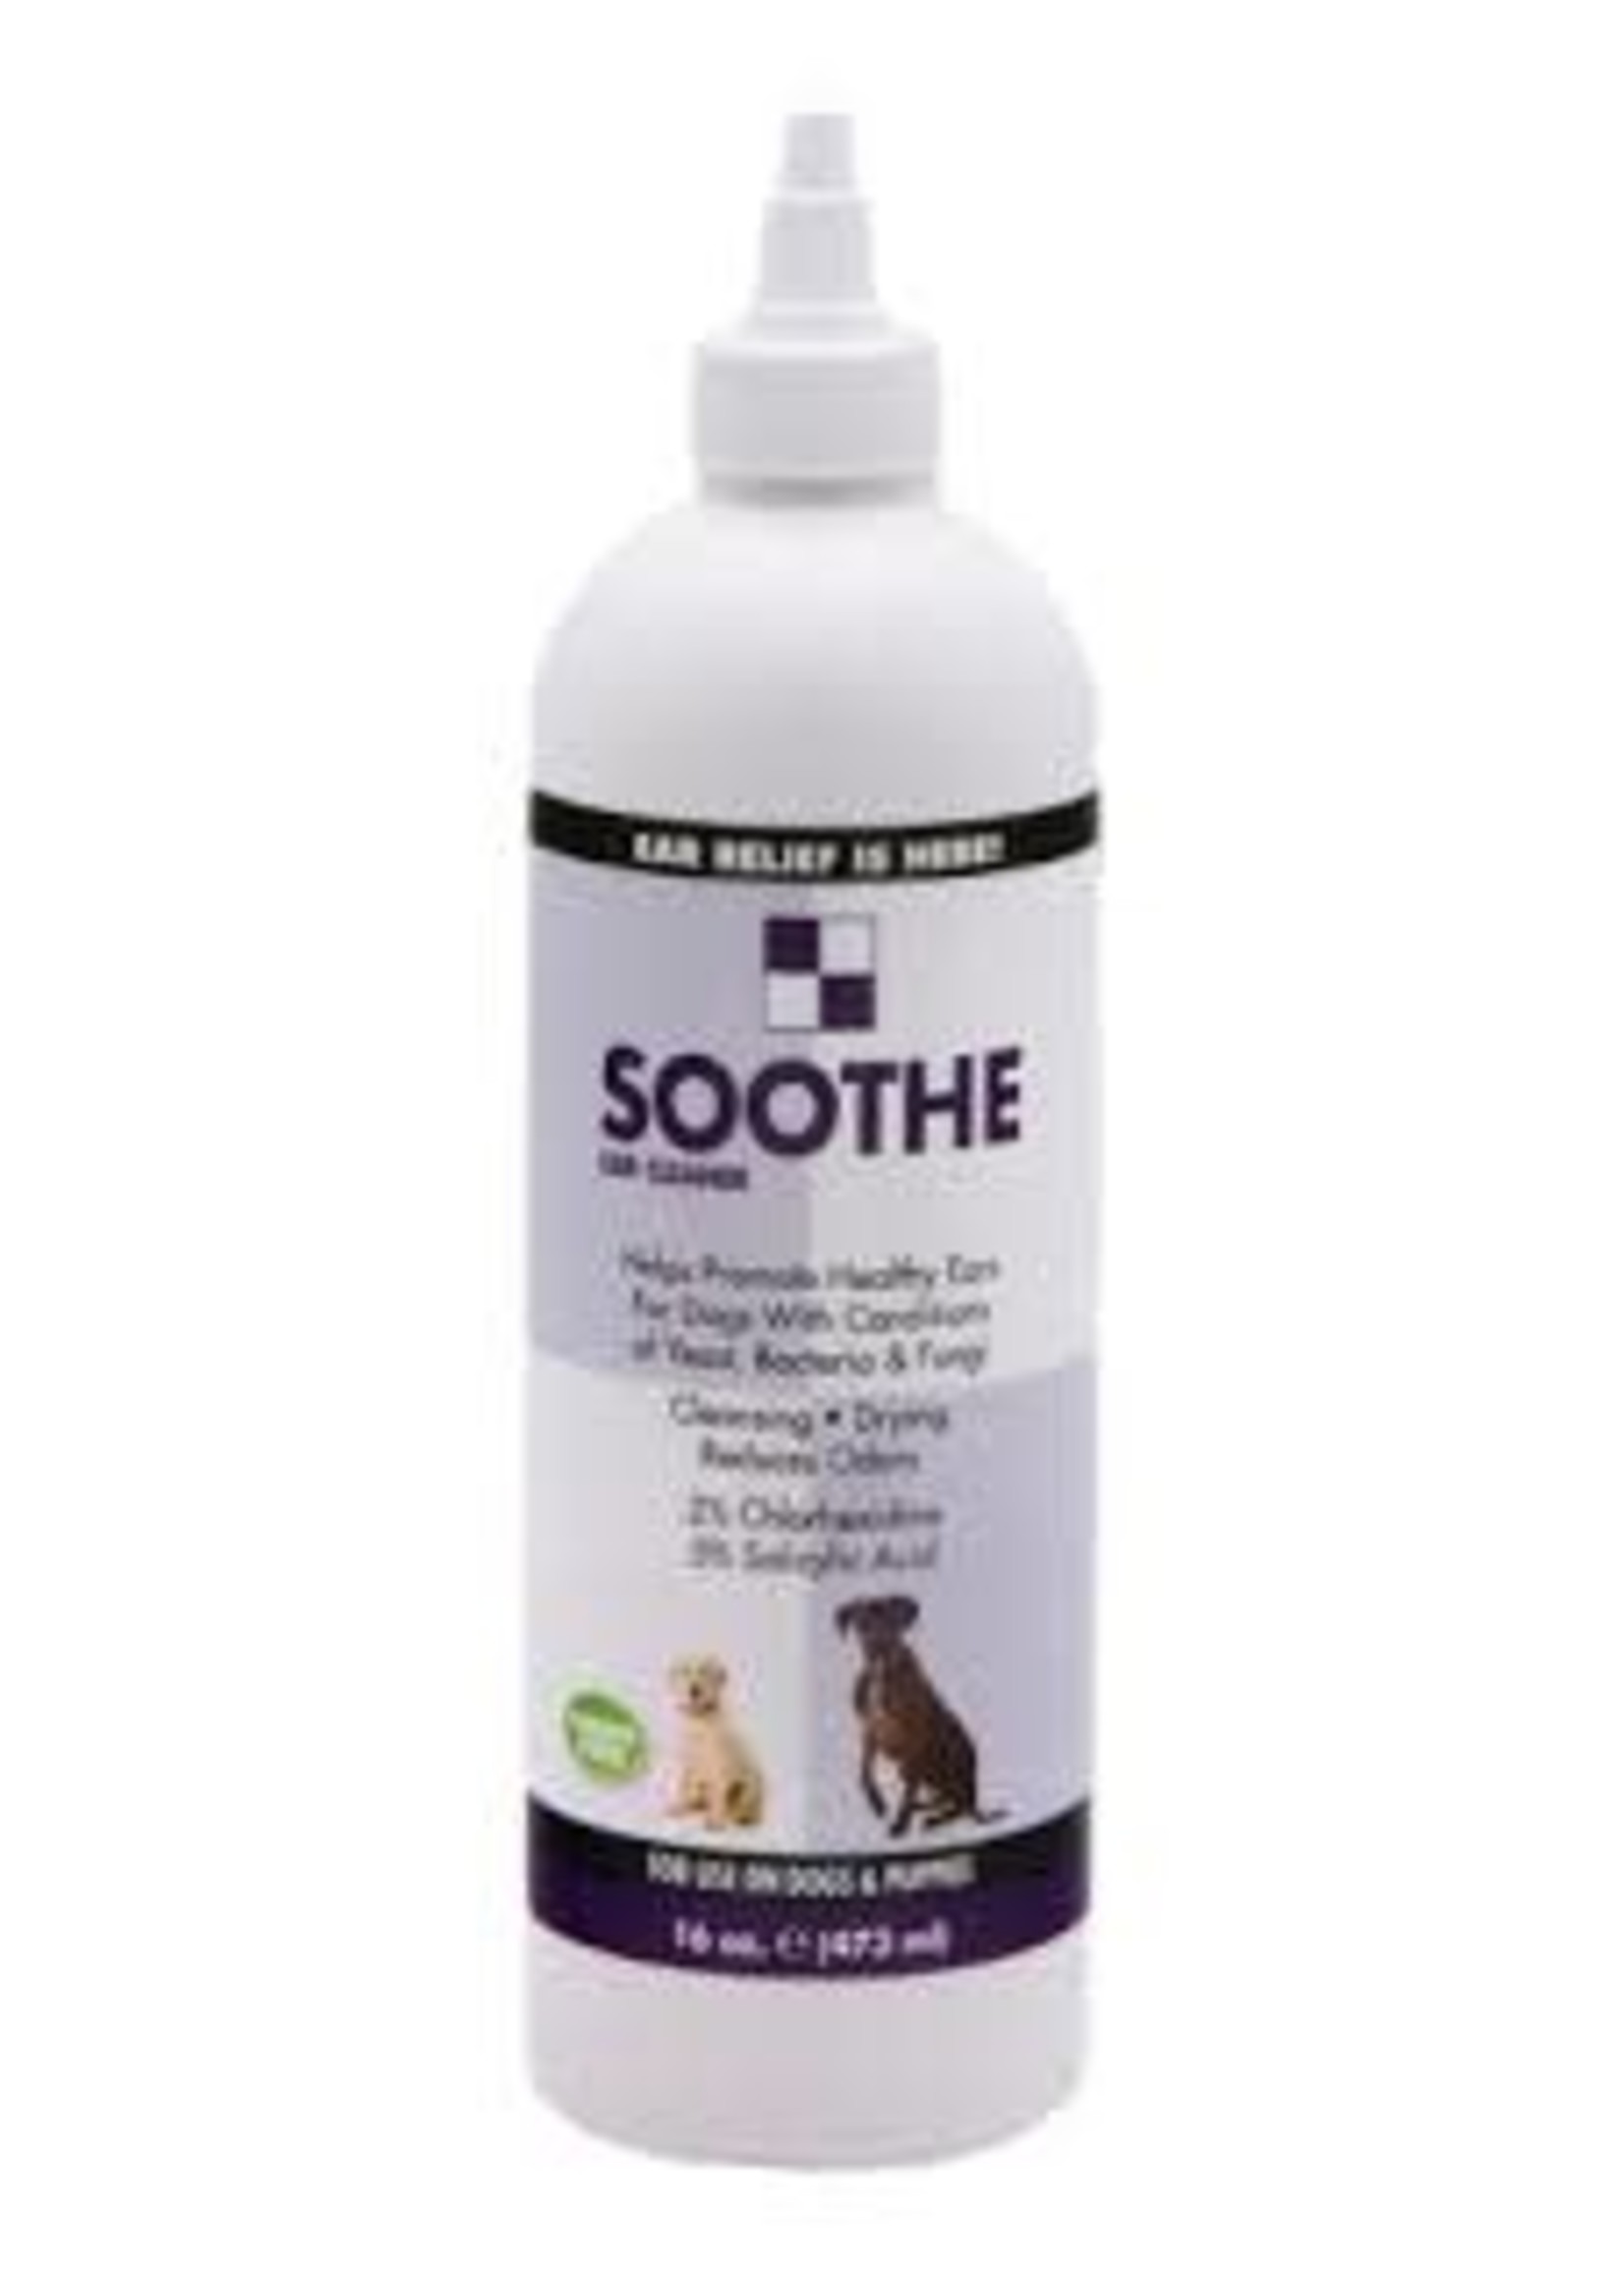 Soothe Ear Cleaner 16oz